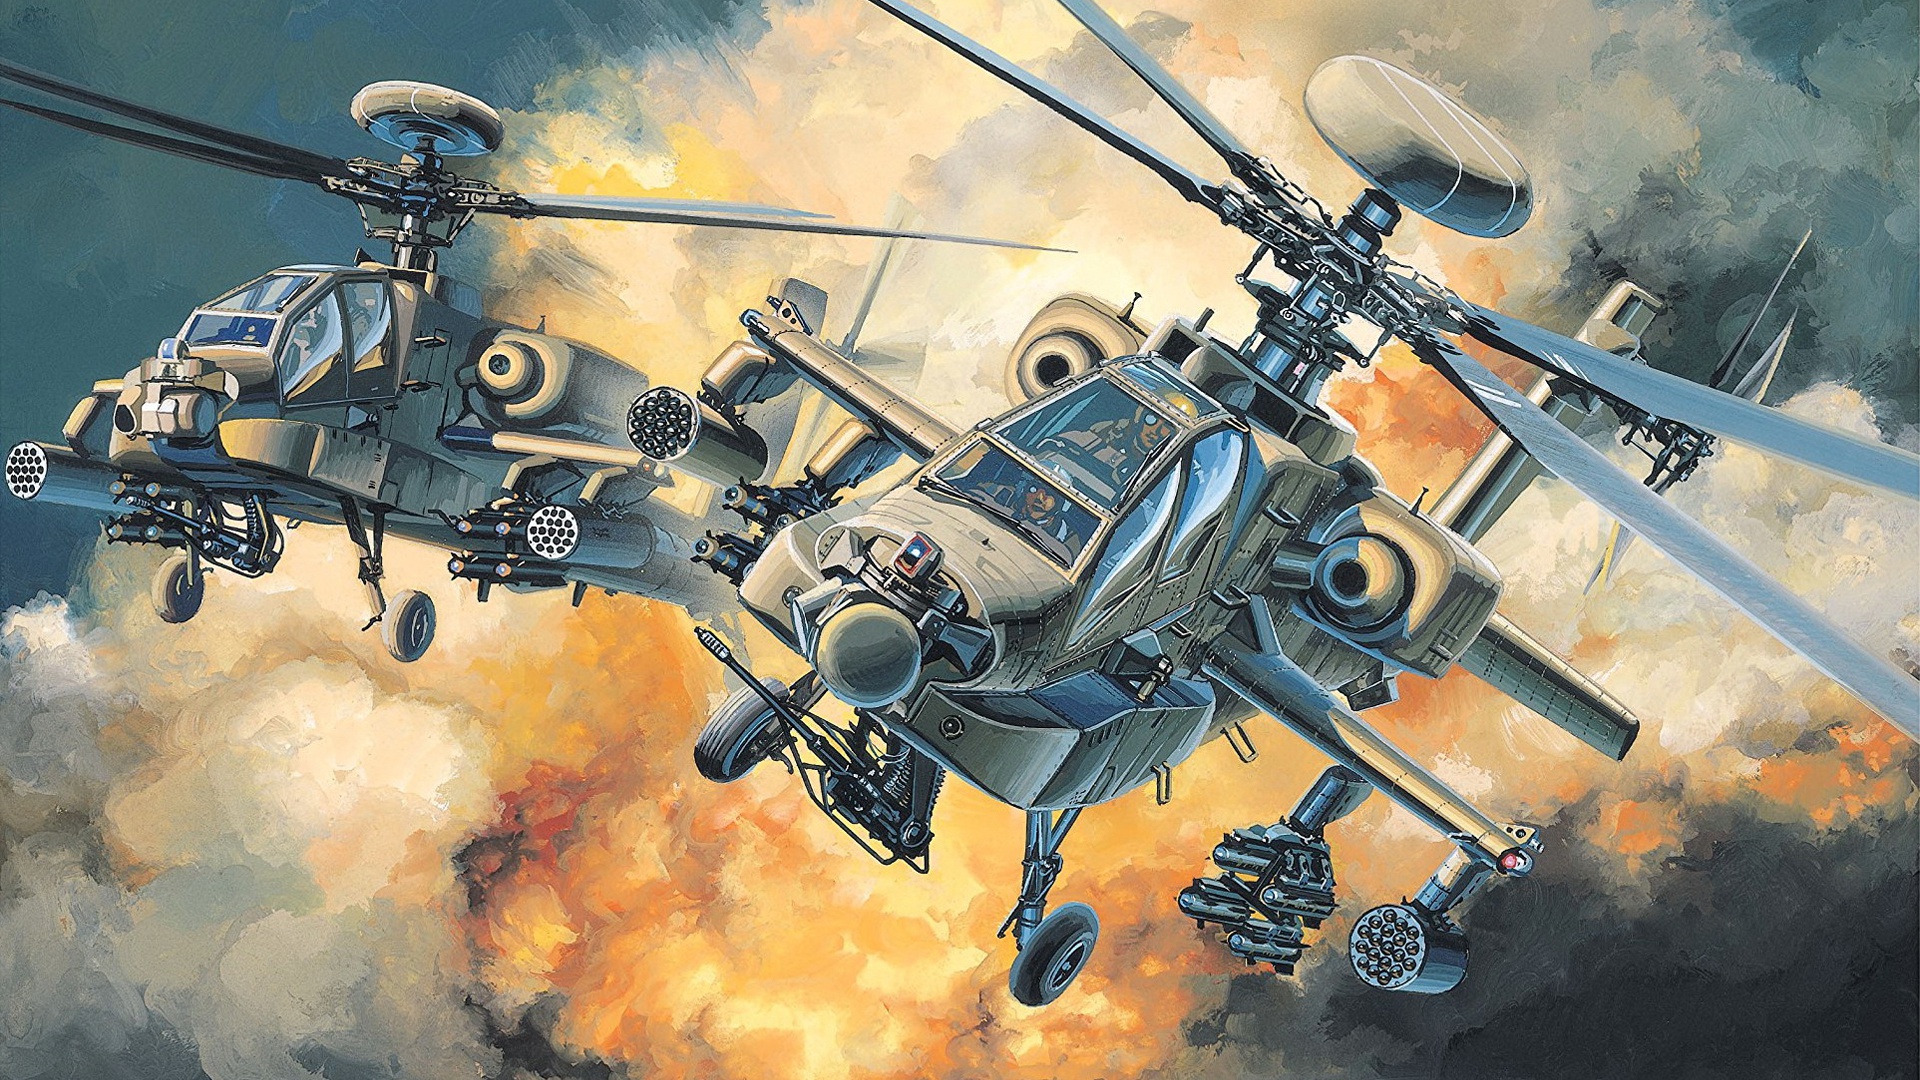 General 1920x1080 artwork military military aircraft helicopters United States Army Boxart American aircraft Boeing pilot attack helicopters sky Boeing AH-64 Apache Masao Satake frontal view men flying vehicle aircraft